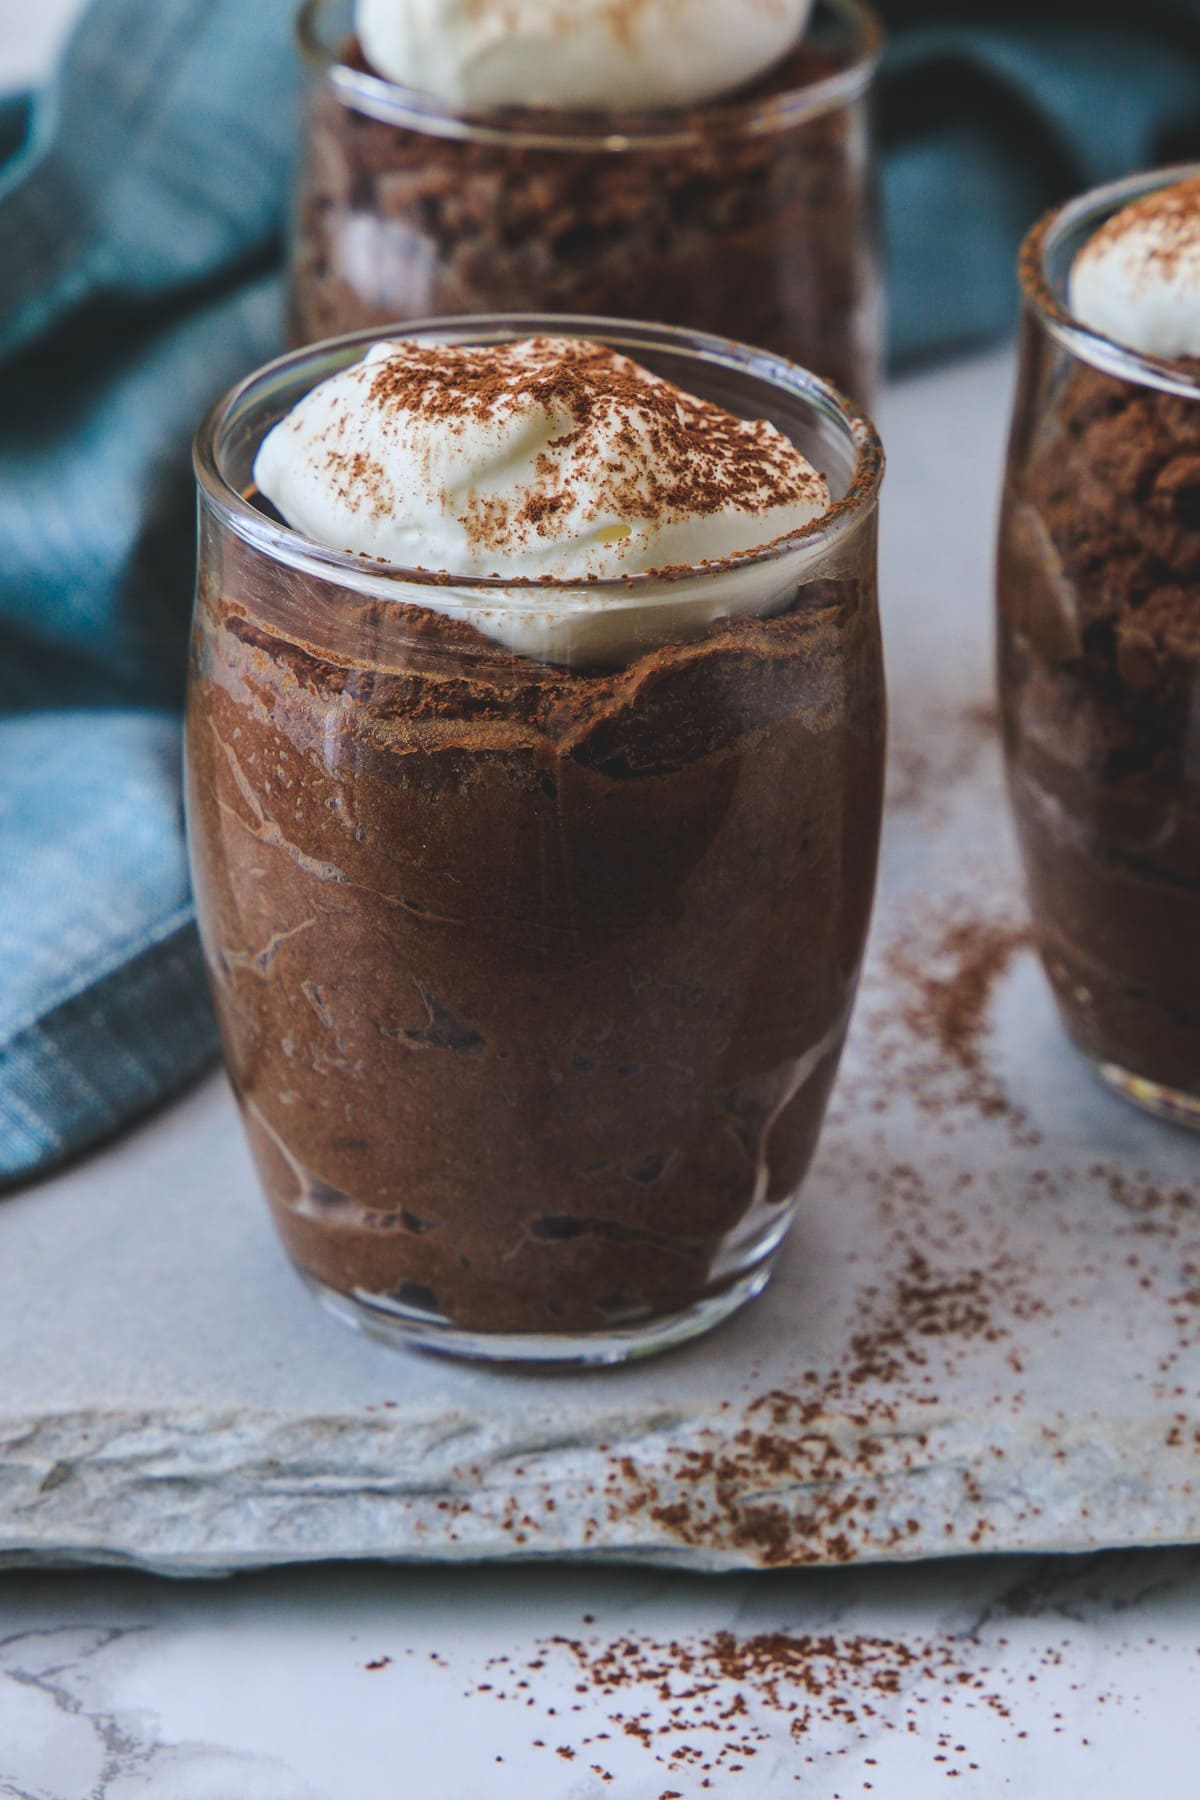 Individual serving glass of eggless chocolate mousse garnished with whipped cream and cocoa powder.